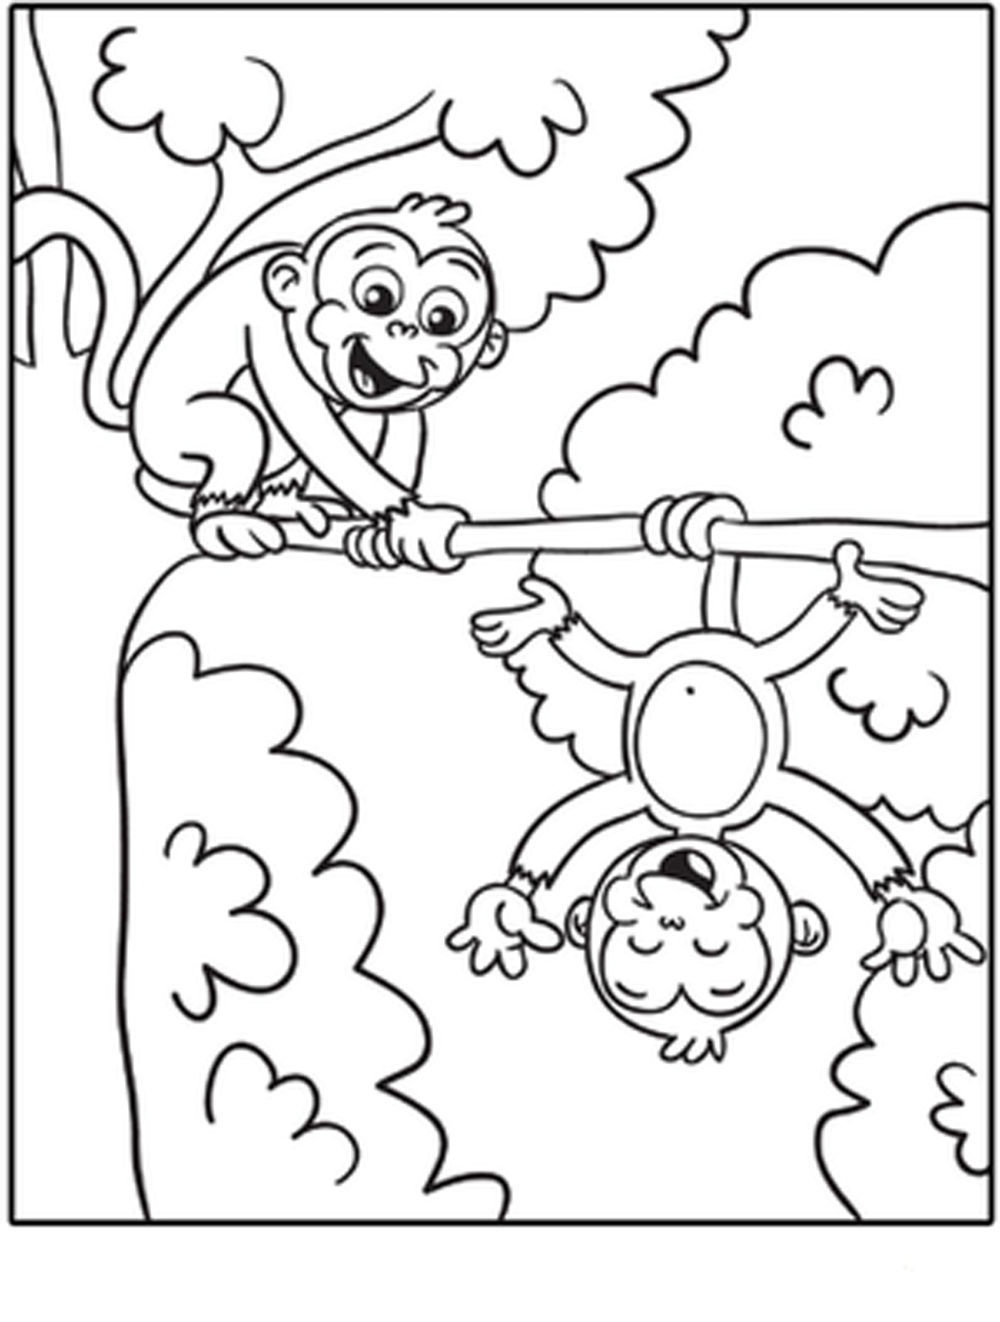 Free-Printable-Monkey-Coloring-Pages | | Bestappsforkids - Free Printable Monkey Coloring Pages